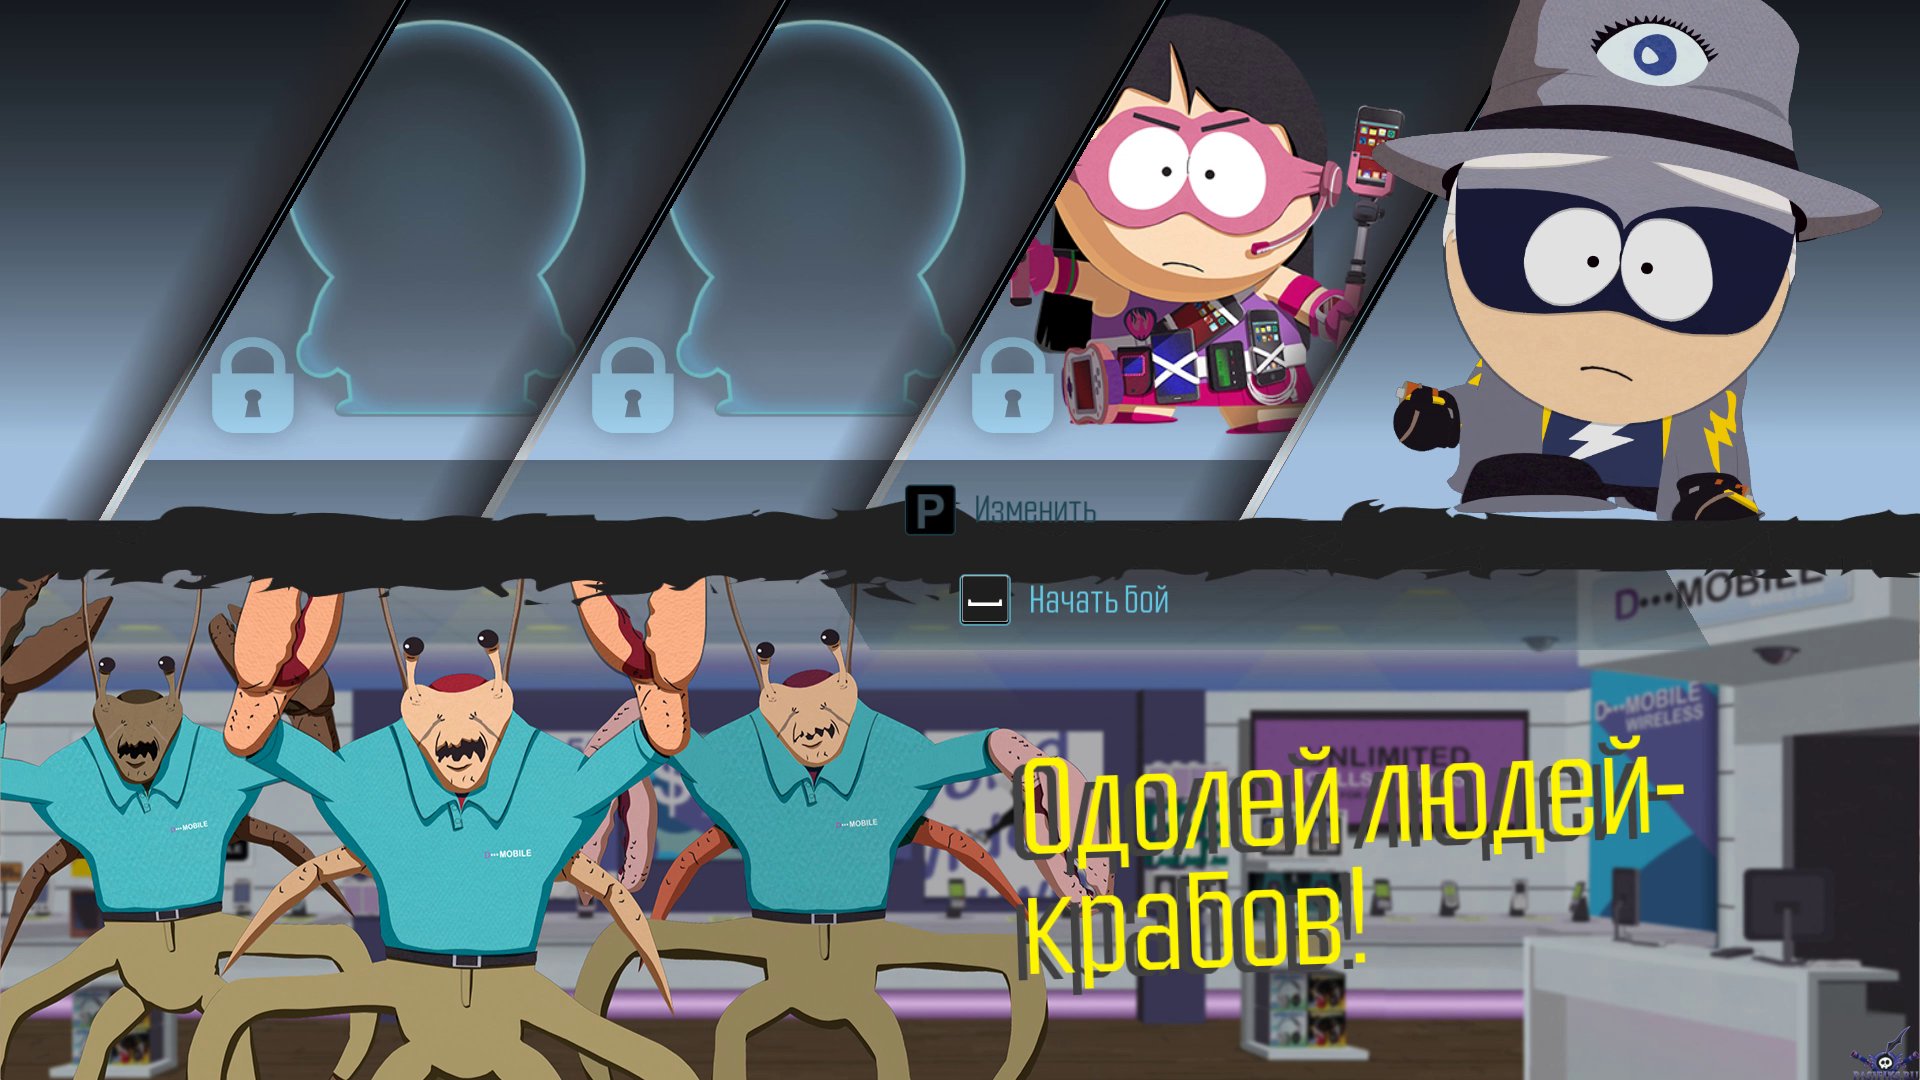 South park the fractured but whole купить ключ steam дешево фото 62